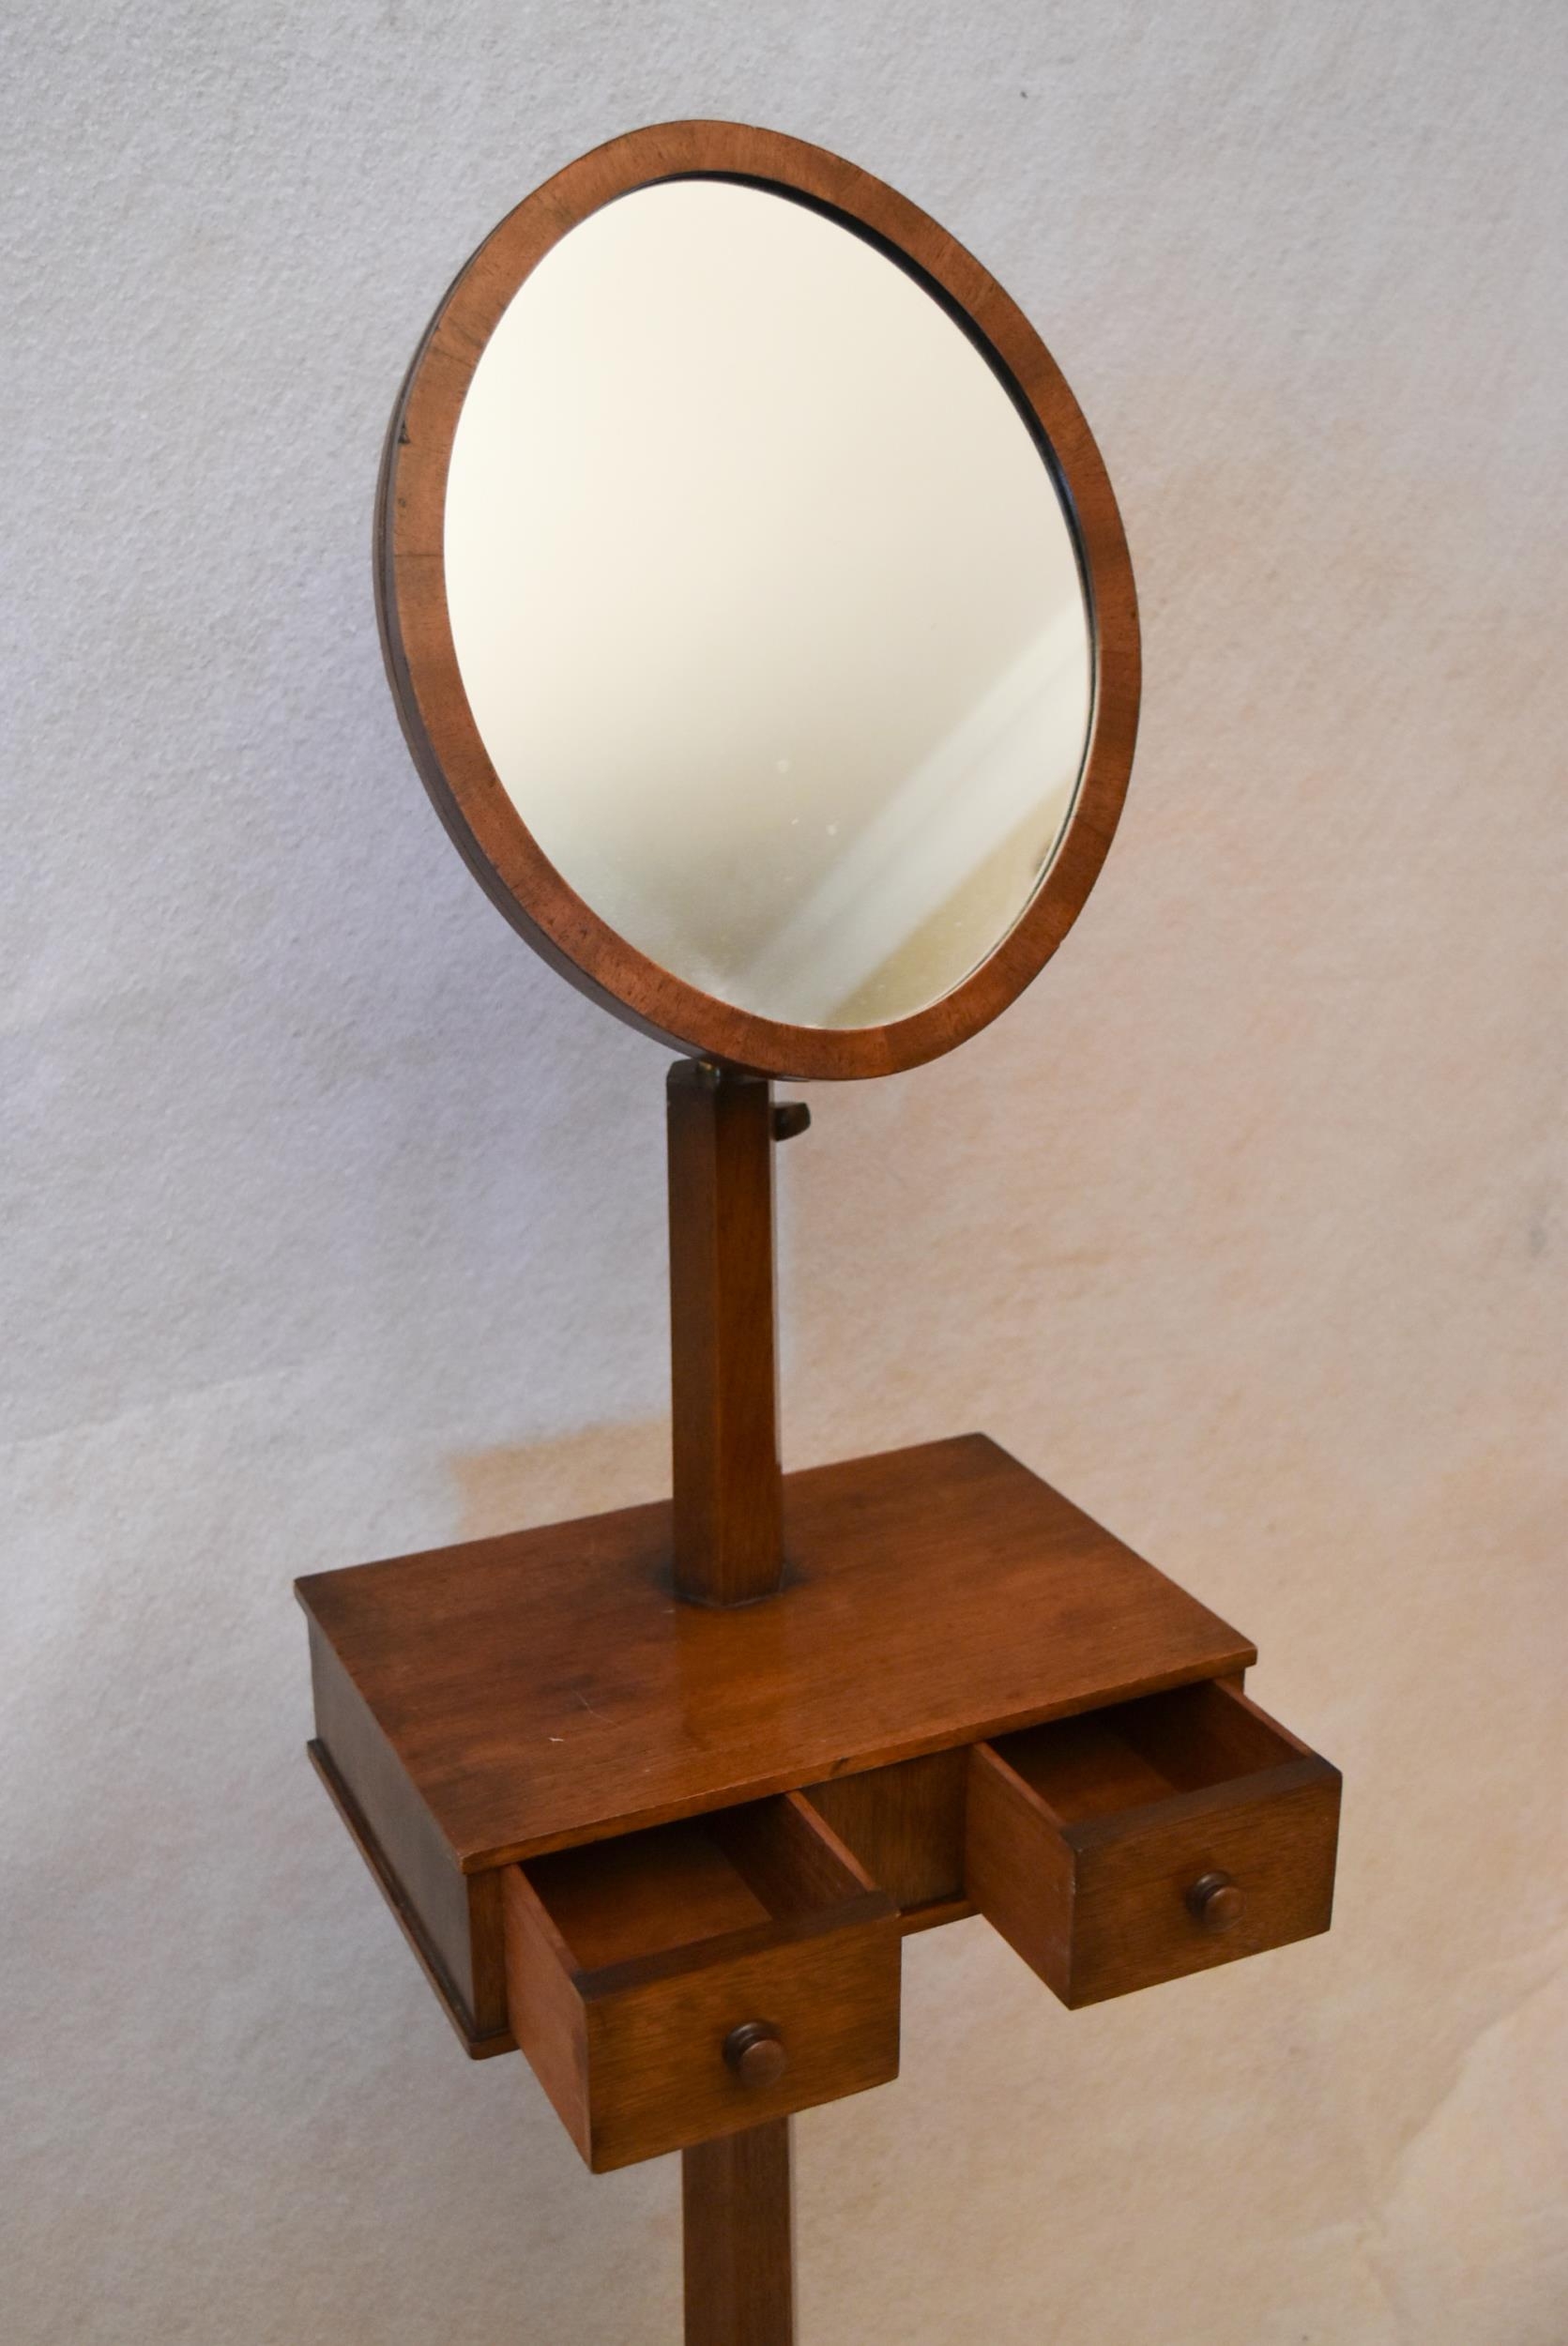 An early 20th century oak gentleman's shaving stand, with an oval mirror on a telescopic frame, - Image 3 of 3